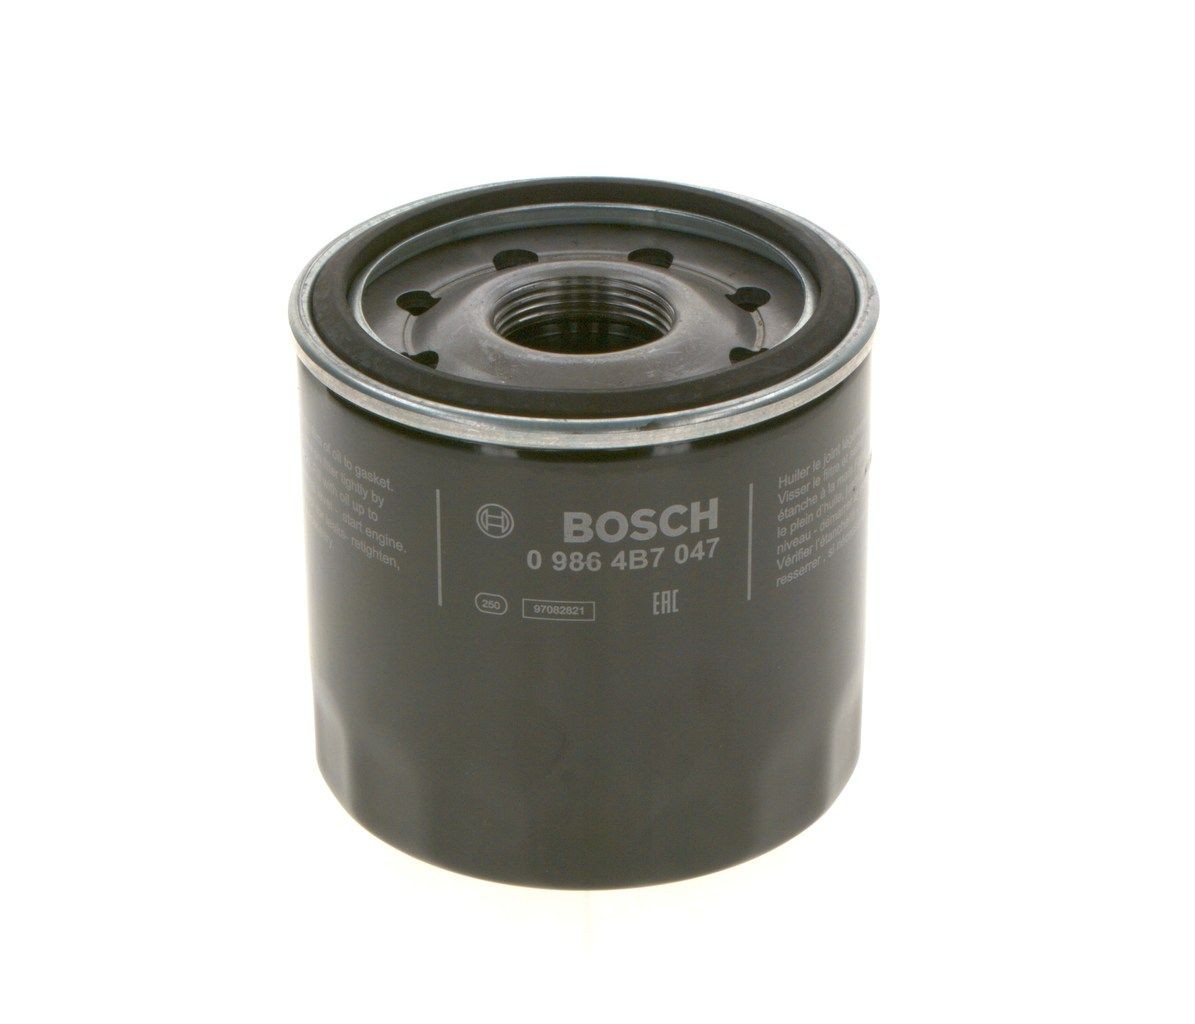 09864B7047 Oil filters BOSCH 0 986 4B7 047 review and test